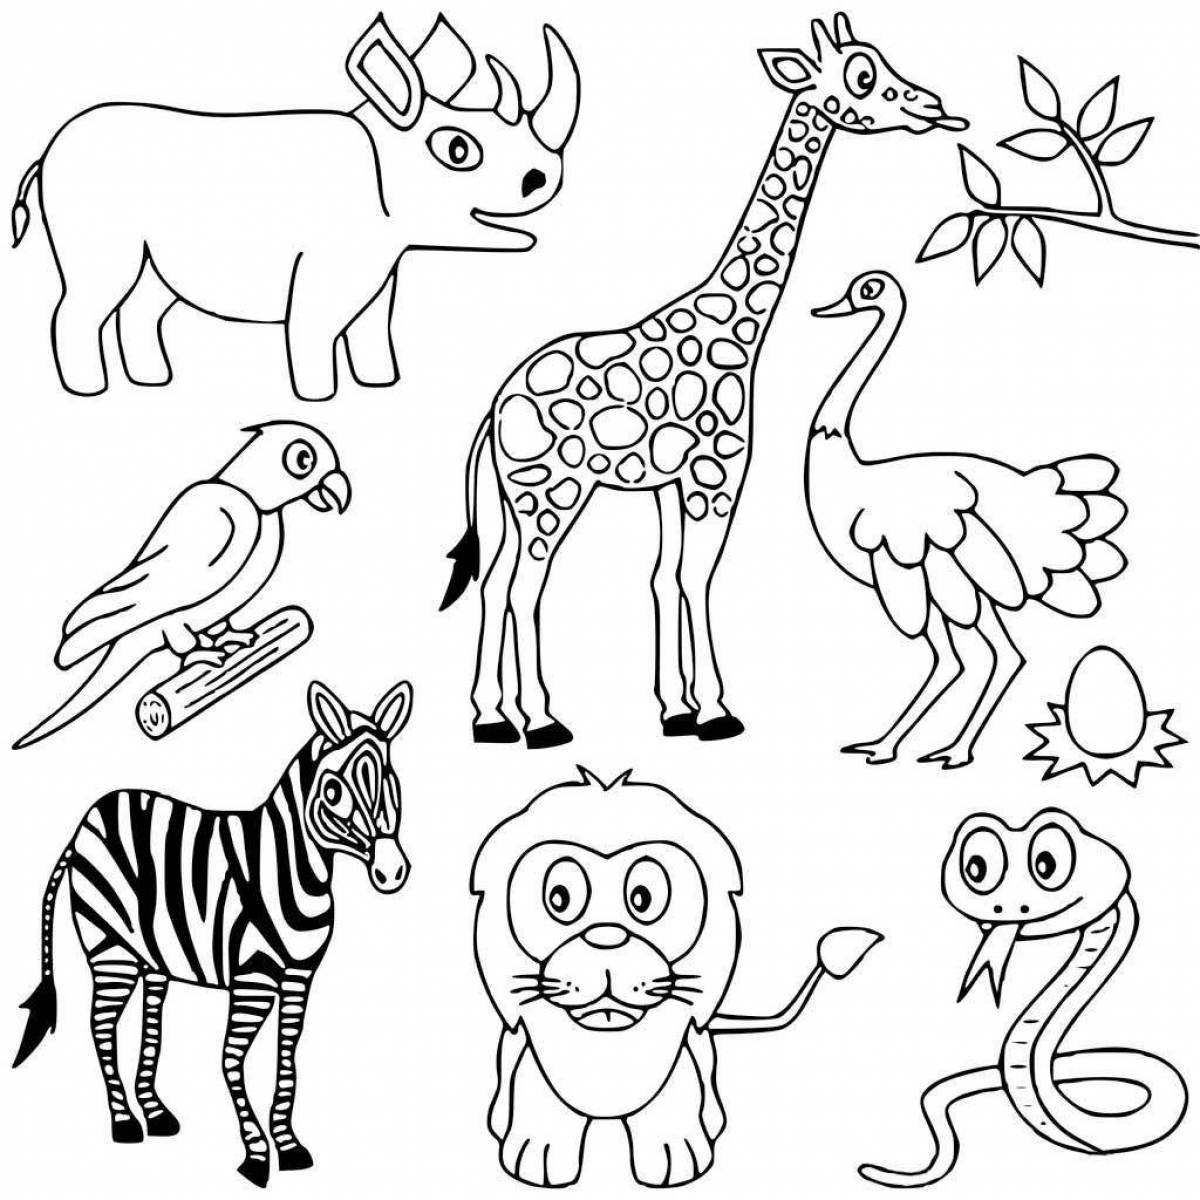 Radiant coloring animals of hot countries for children 5-6 years old